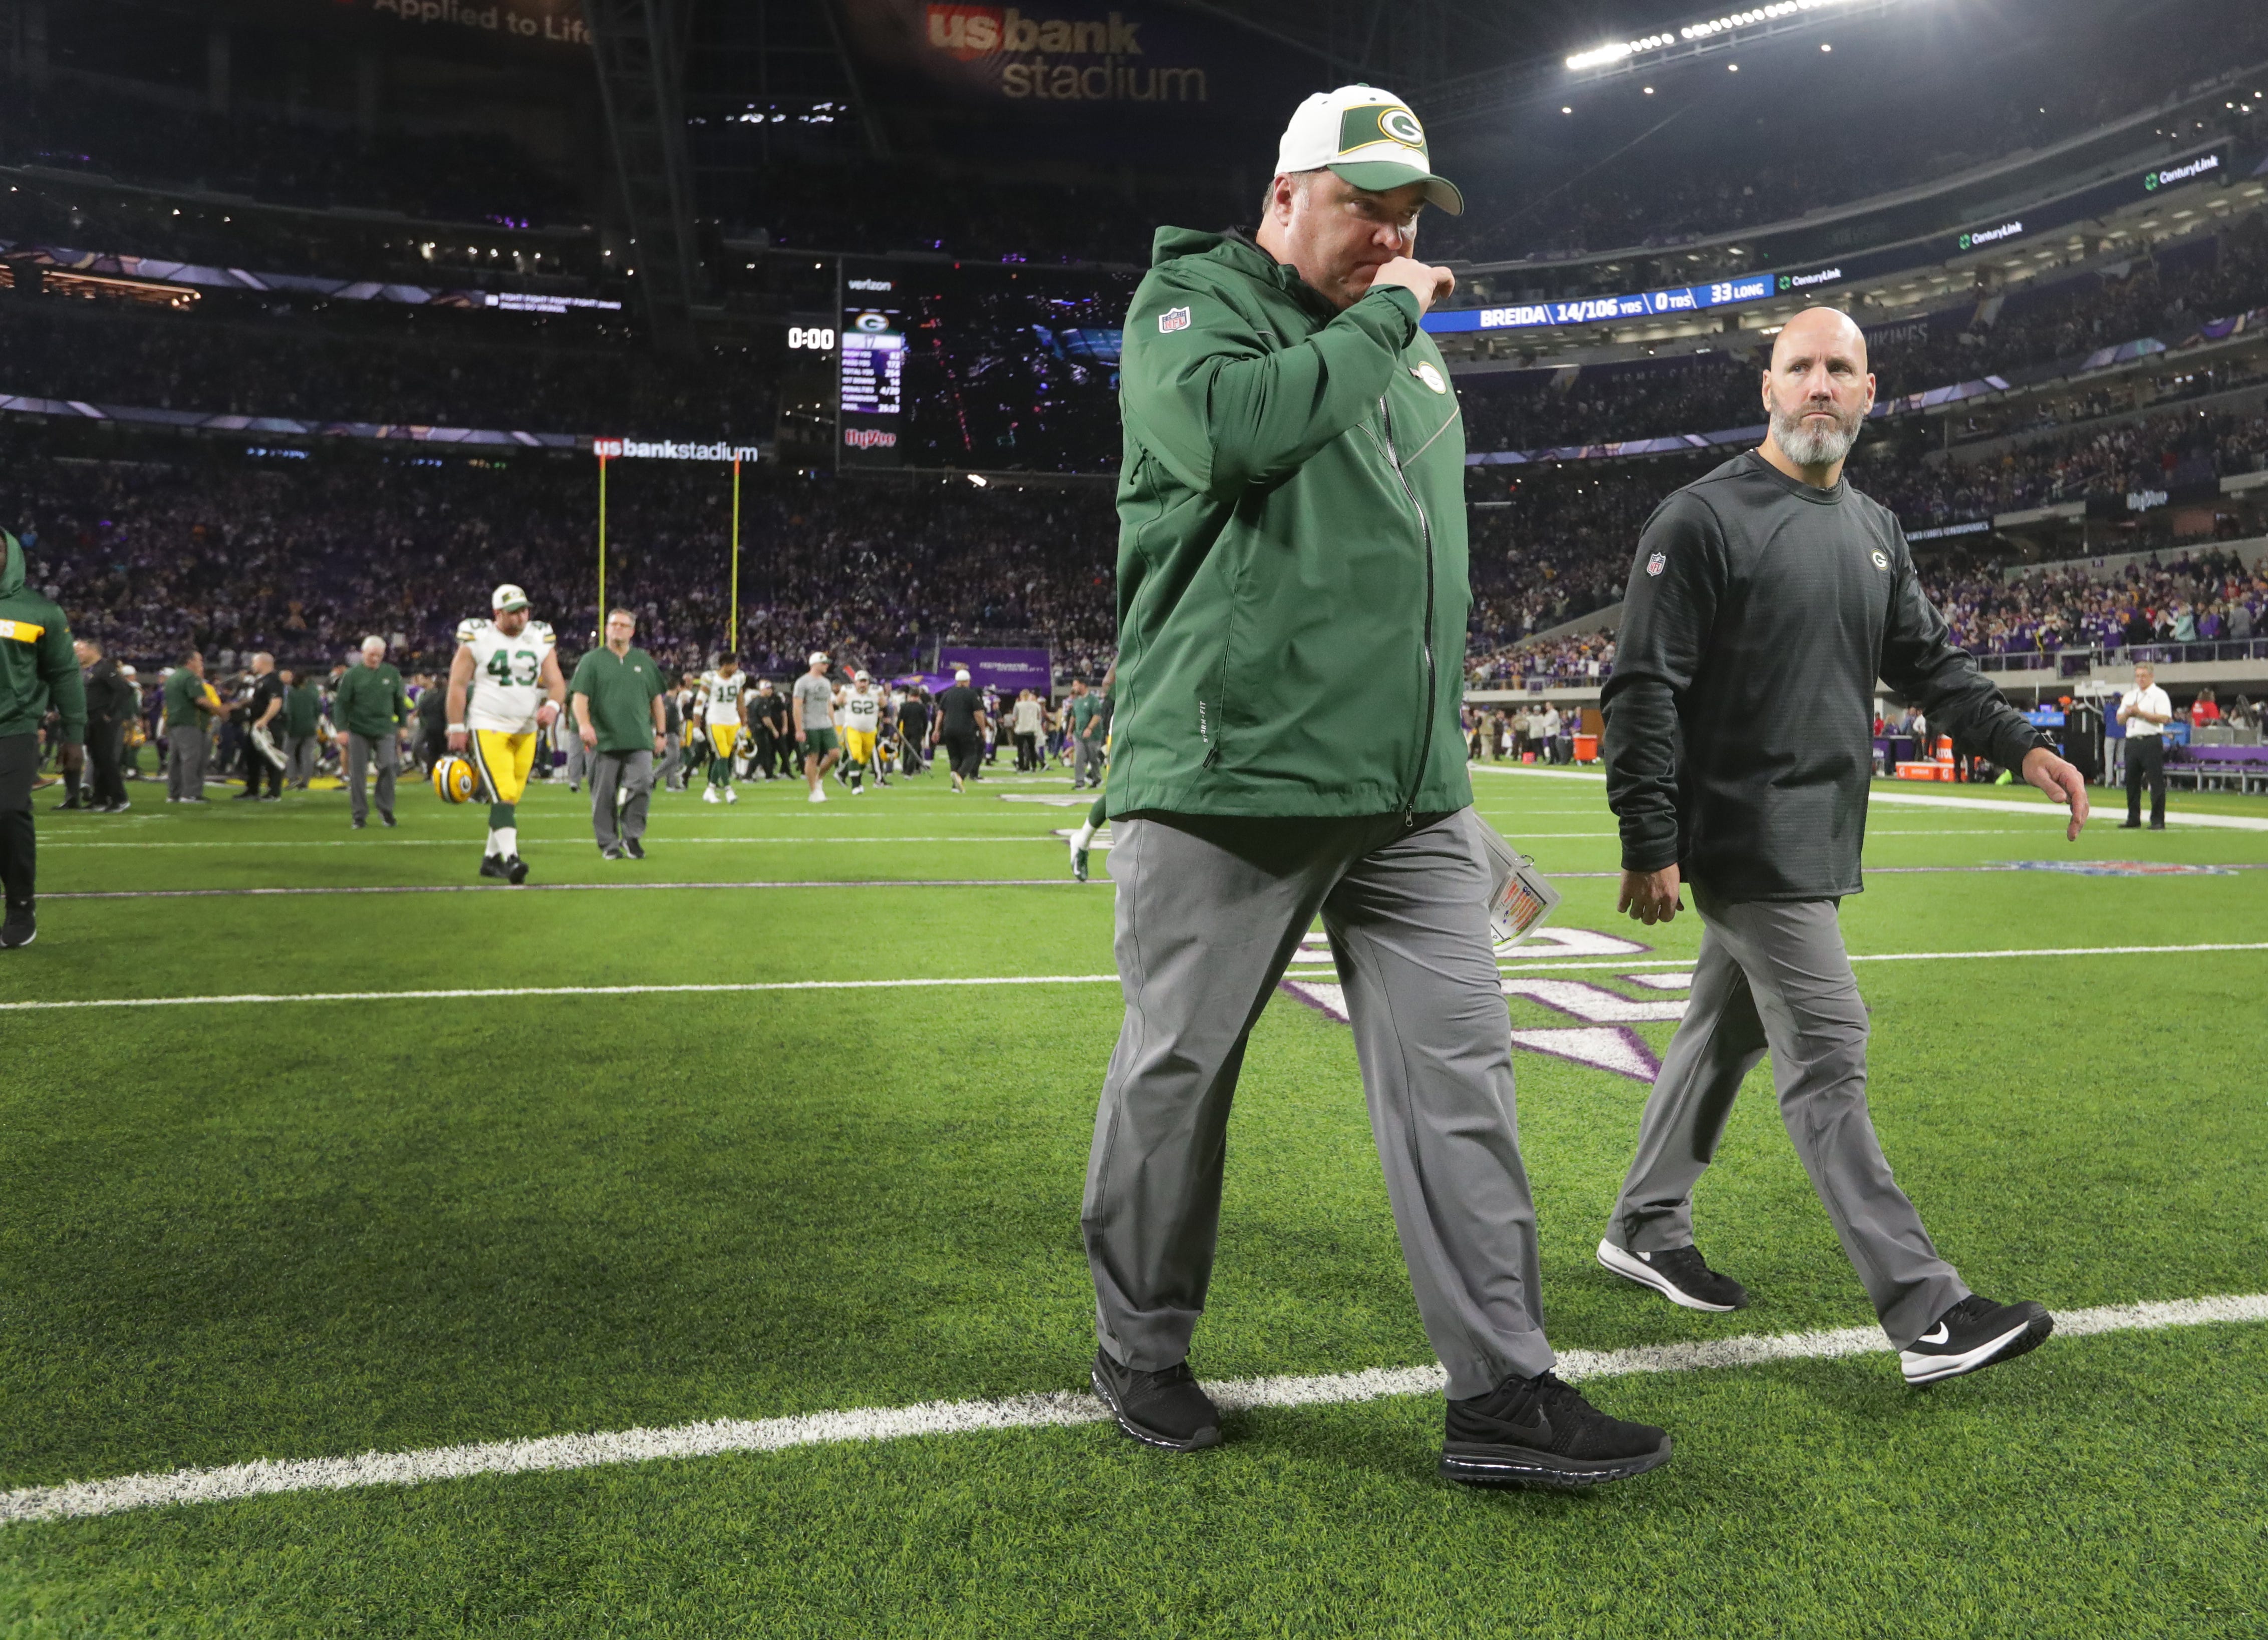 Green Bay Packers head coach Mike McCarthy leaves the field after their game Sunday, November 25, 2018 at U.S. Bank Stadium in Minneapolis, Minn. The Minnesota Vikings beat the Green Bay Packers 24-17.

MARK HOFFMAN/MHOFFMAN@JOURNALSENTINEL.COM